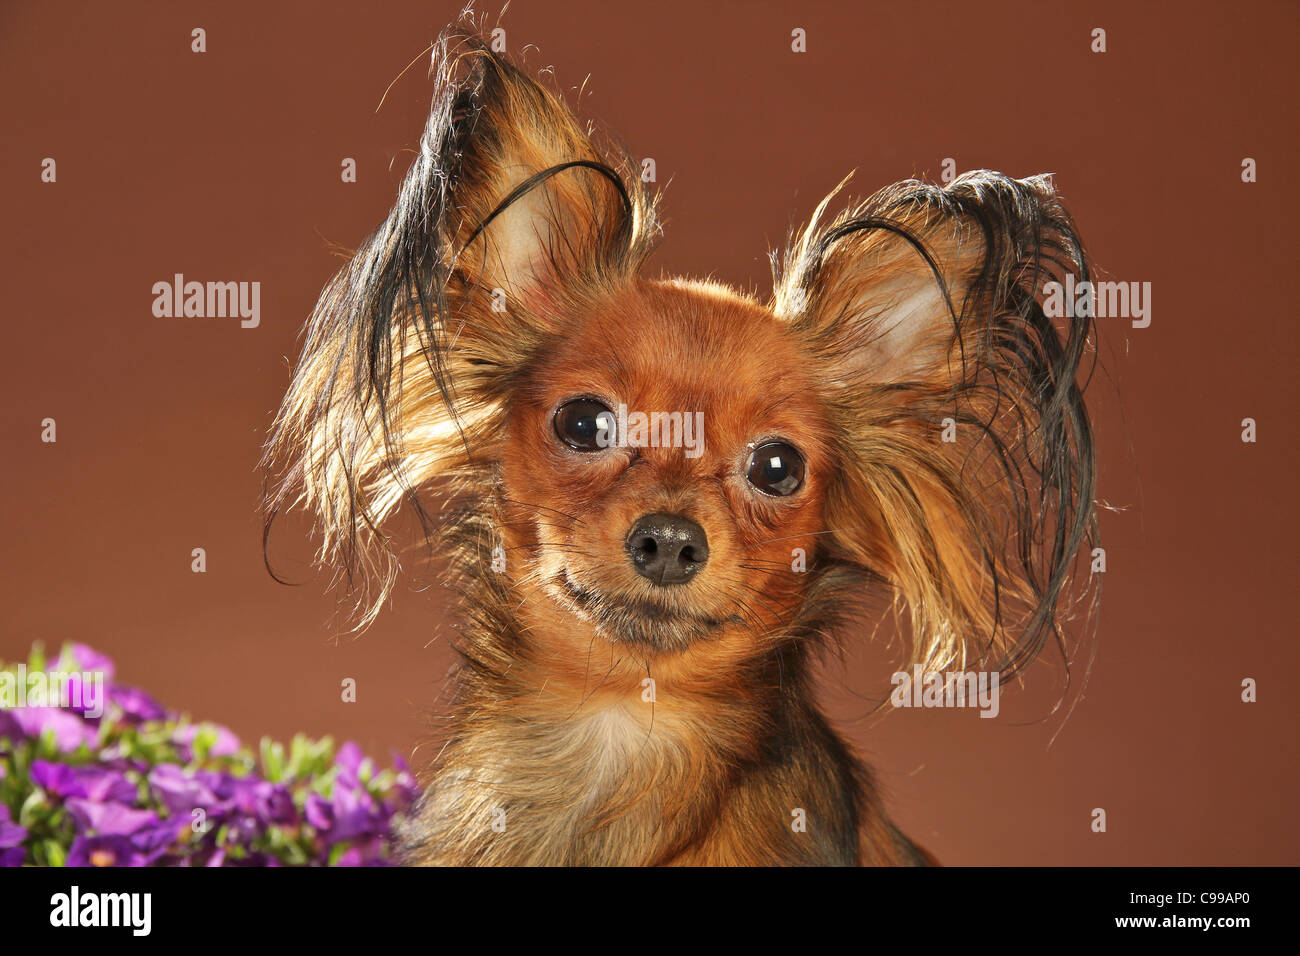 Russian Toy Terrier dog portrait Stock Photo